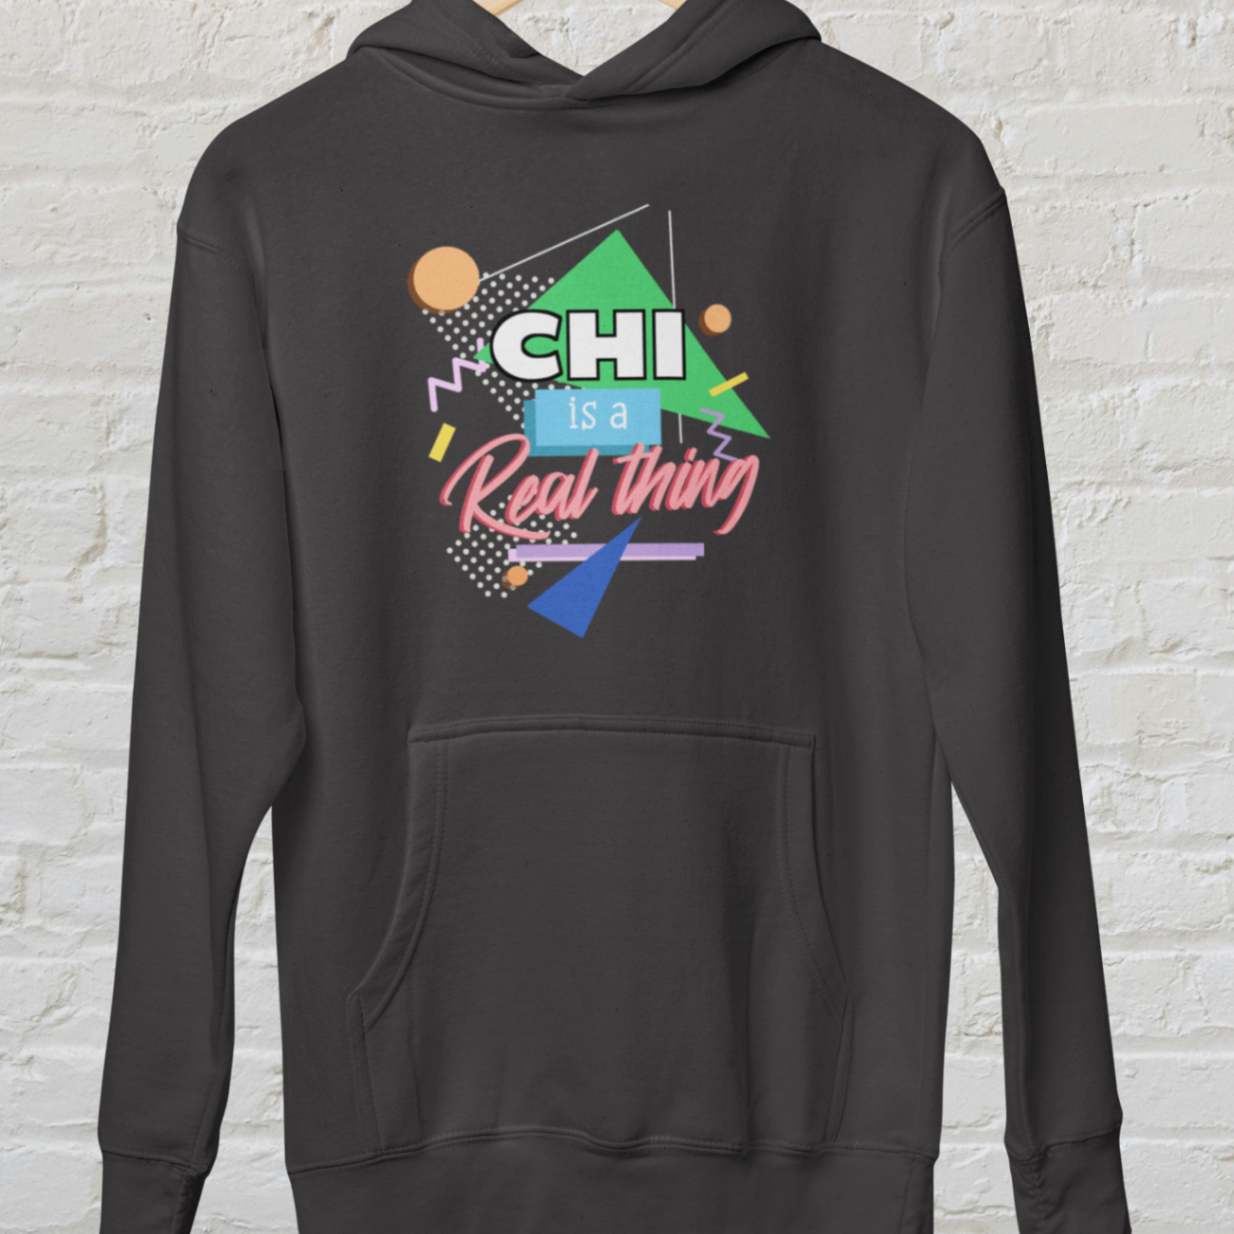 Hoodie black 'chi is a real thing' design white brick backround